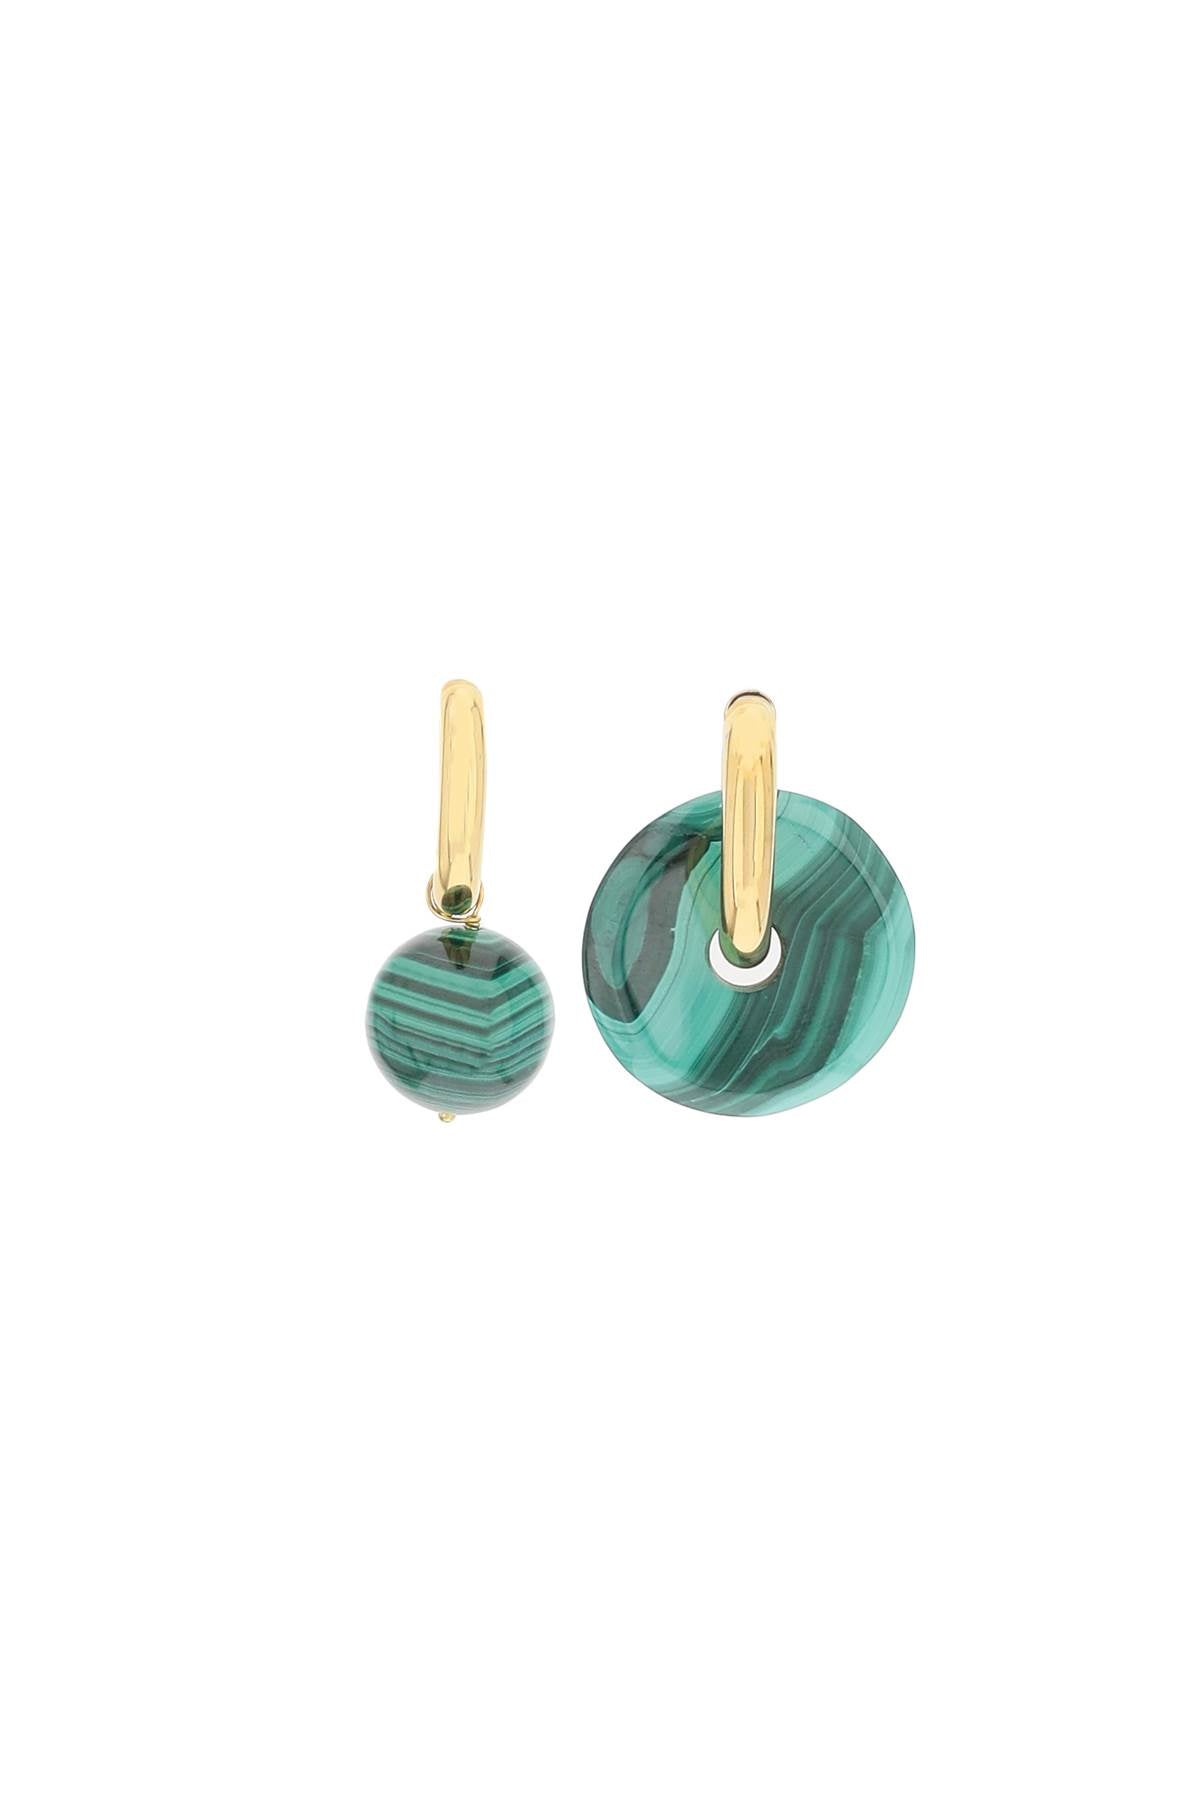 Timeless Pearly Timeless pearly malachite earrings